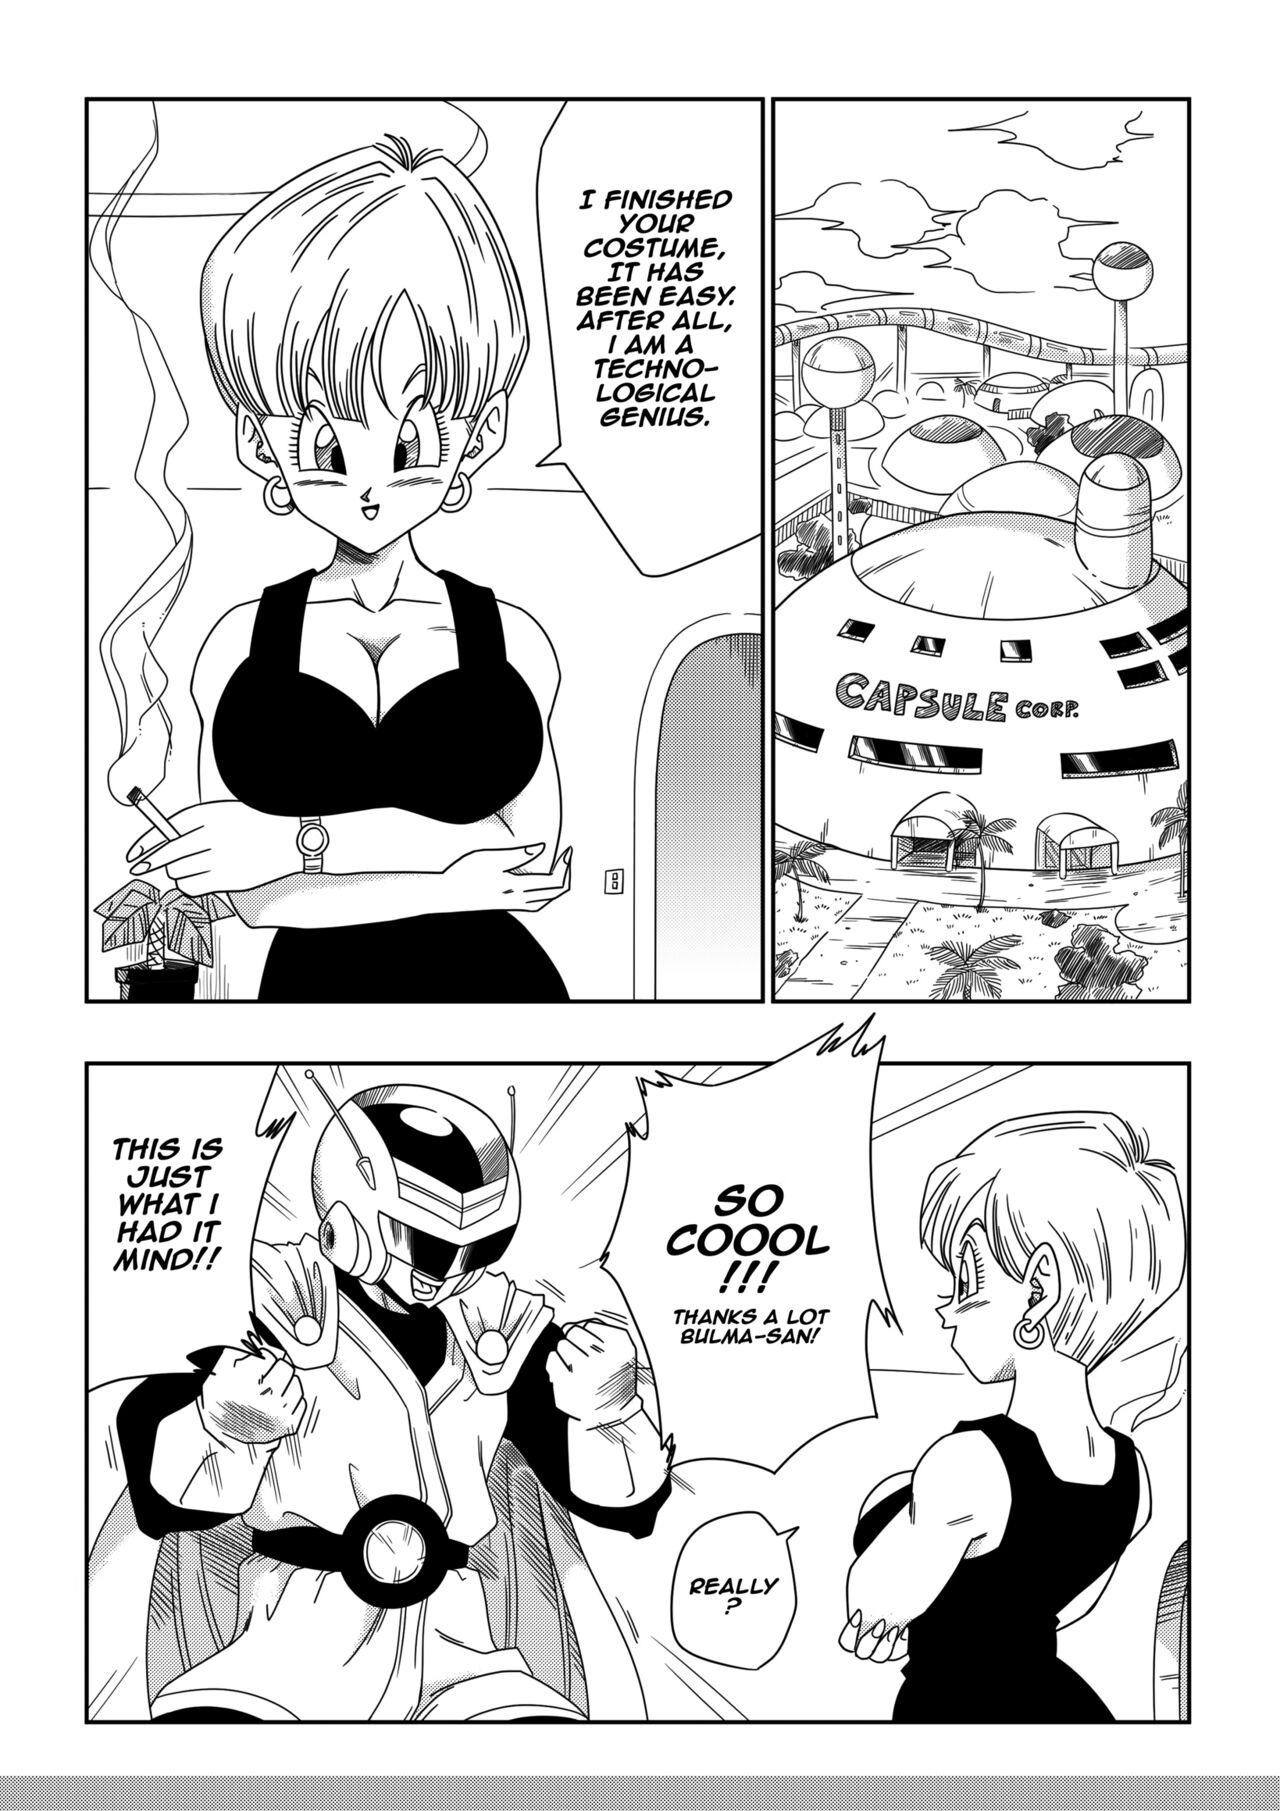 Real LOVE TRIANGLE Z - Part 3 Butt Plug - Page 2